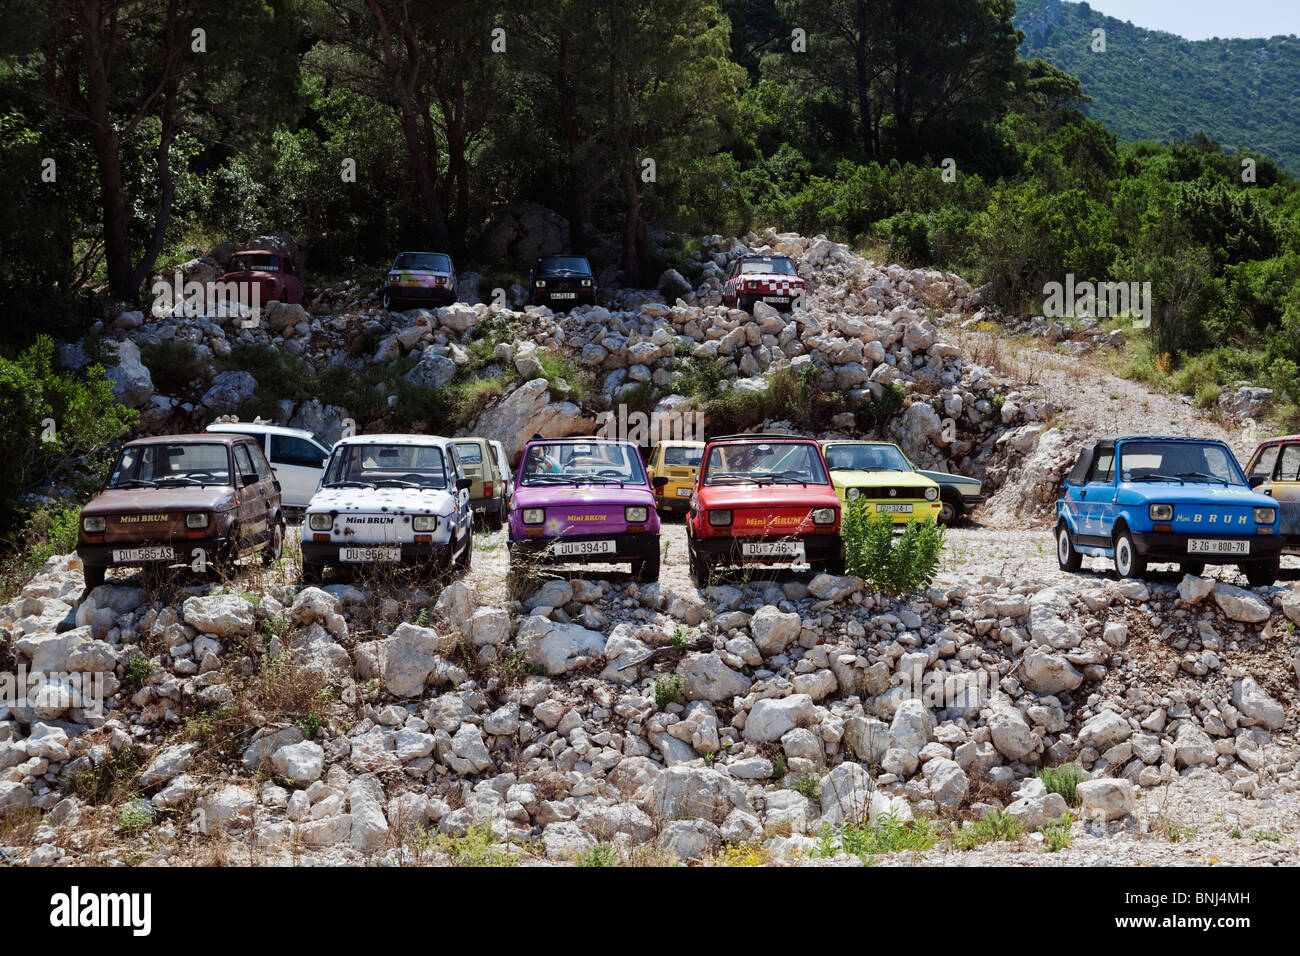 Parking lot of Fiat 500 cars Stock Photo